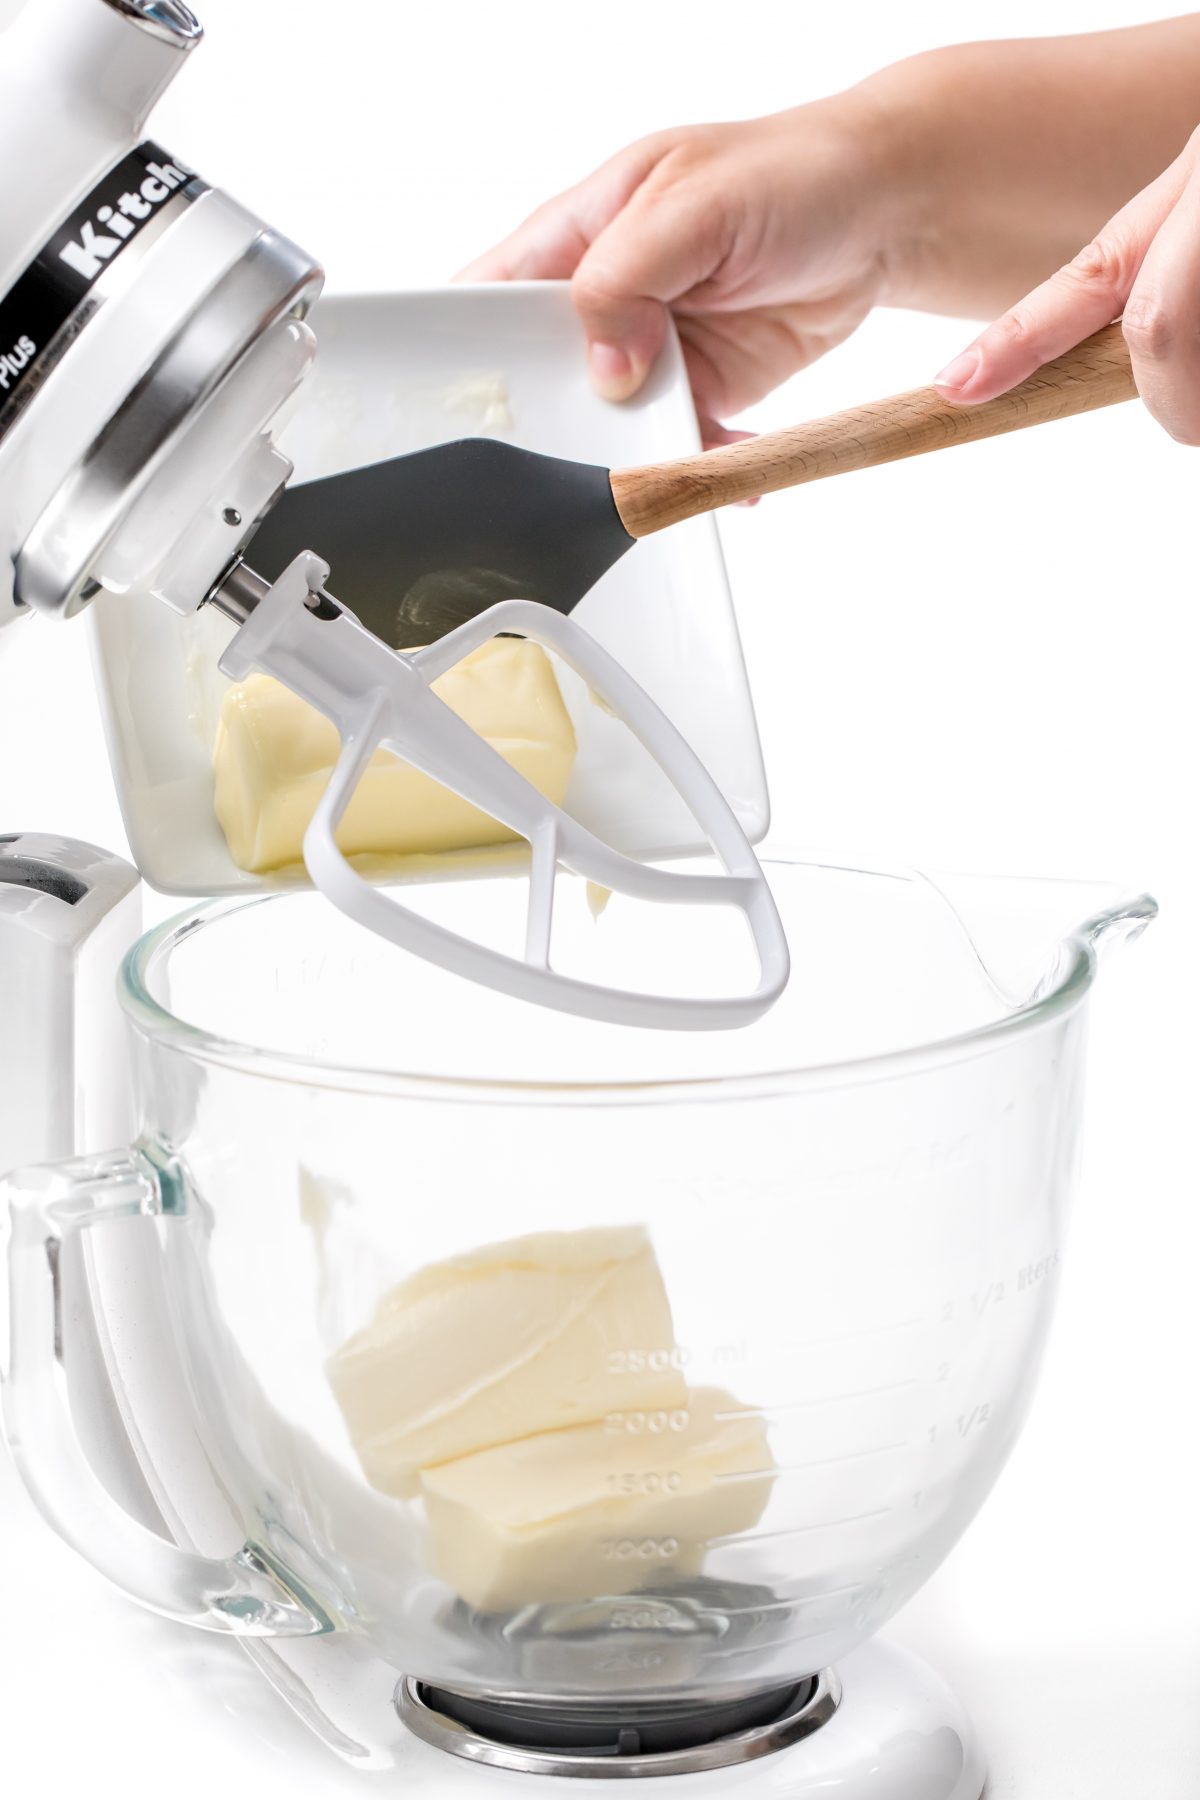 Begin buttercream frosting by adding room tempurature butter to mixer